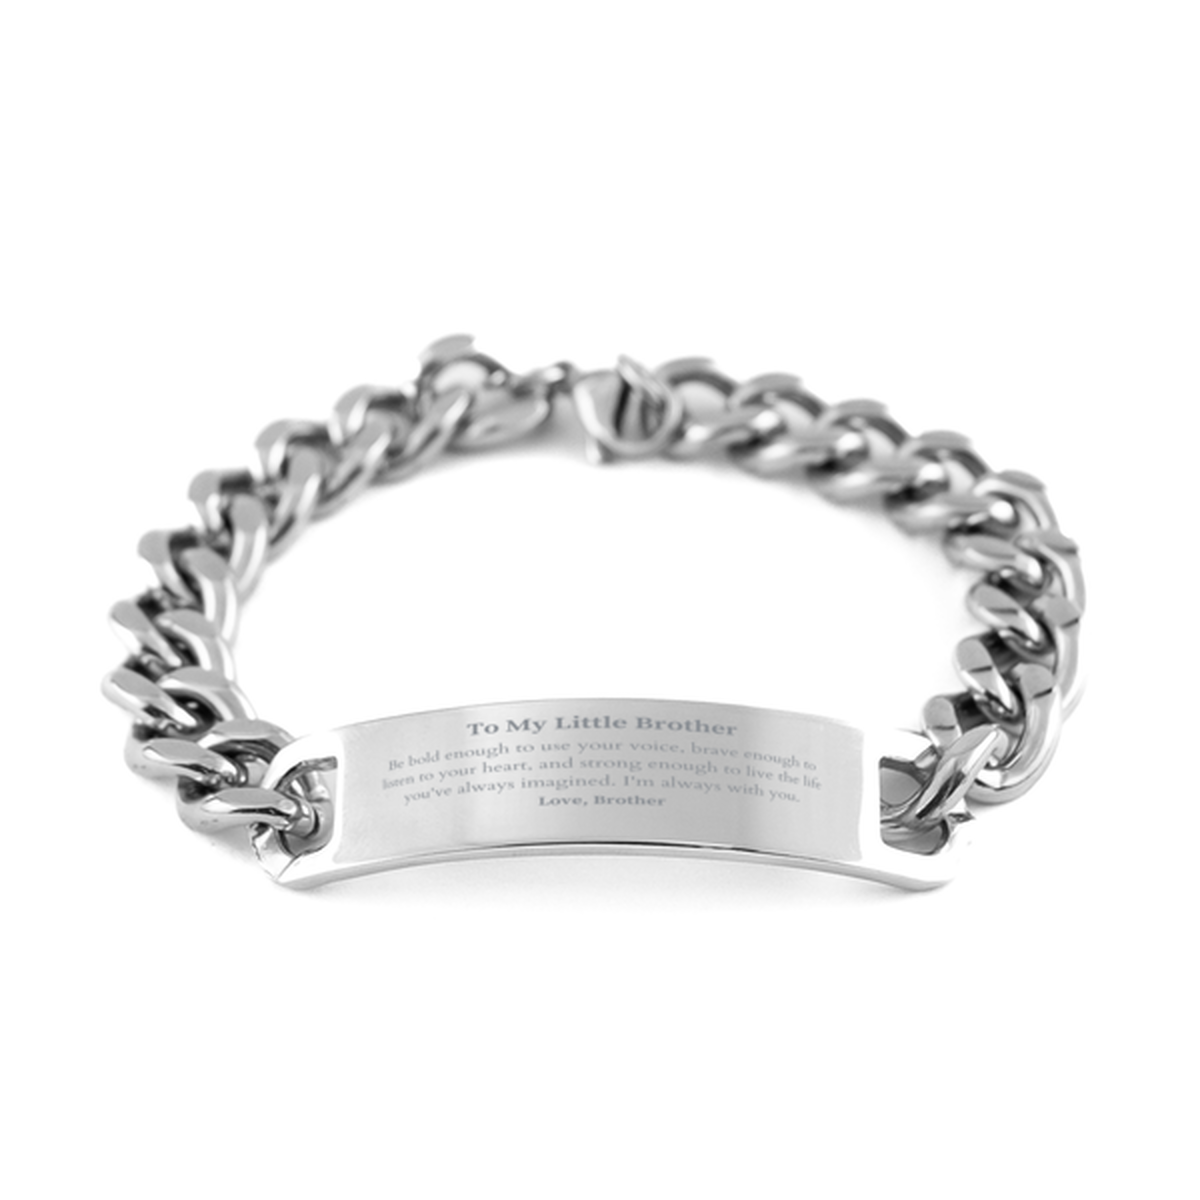 Keepsake Little Brother Cuban Chain Stainless Steel Bracelet Gift Idea Graduation Christmas Birthday Little Brother from Brother, Little Brother Be bold enough to use your voice, brave enough to listen to your heart. Love, Brother